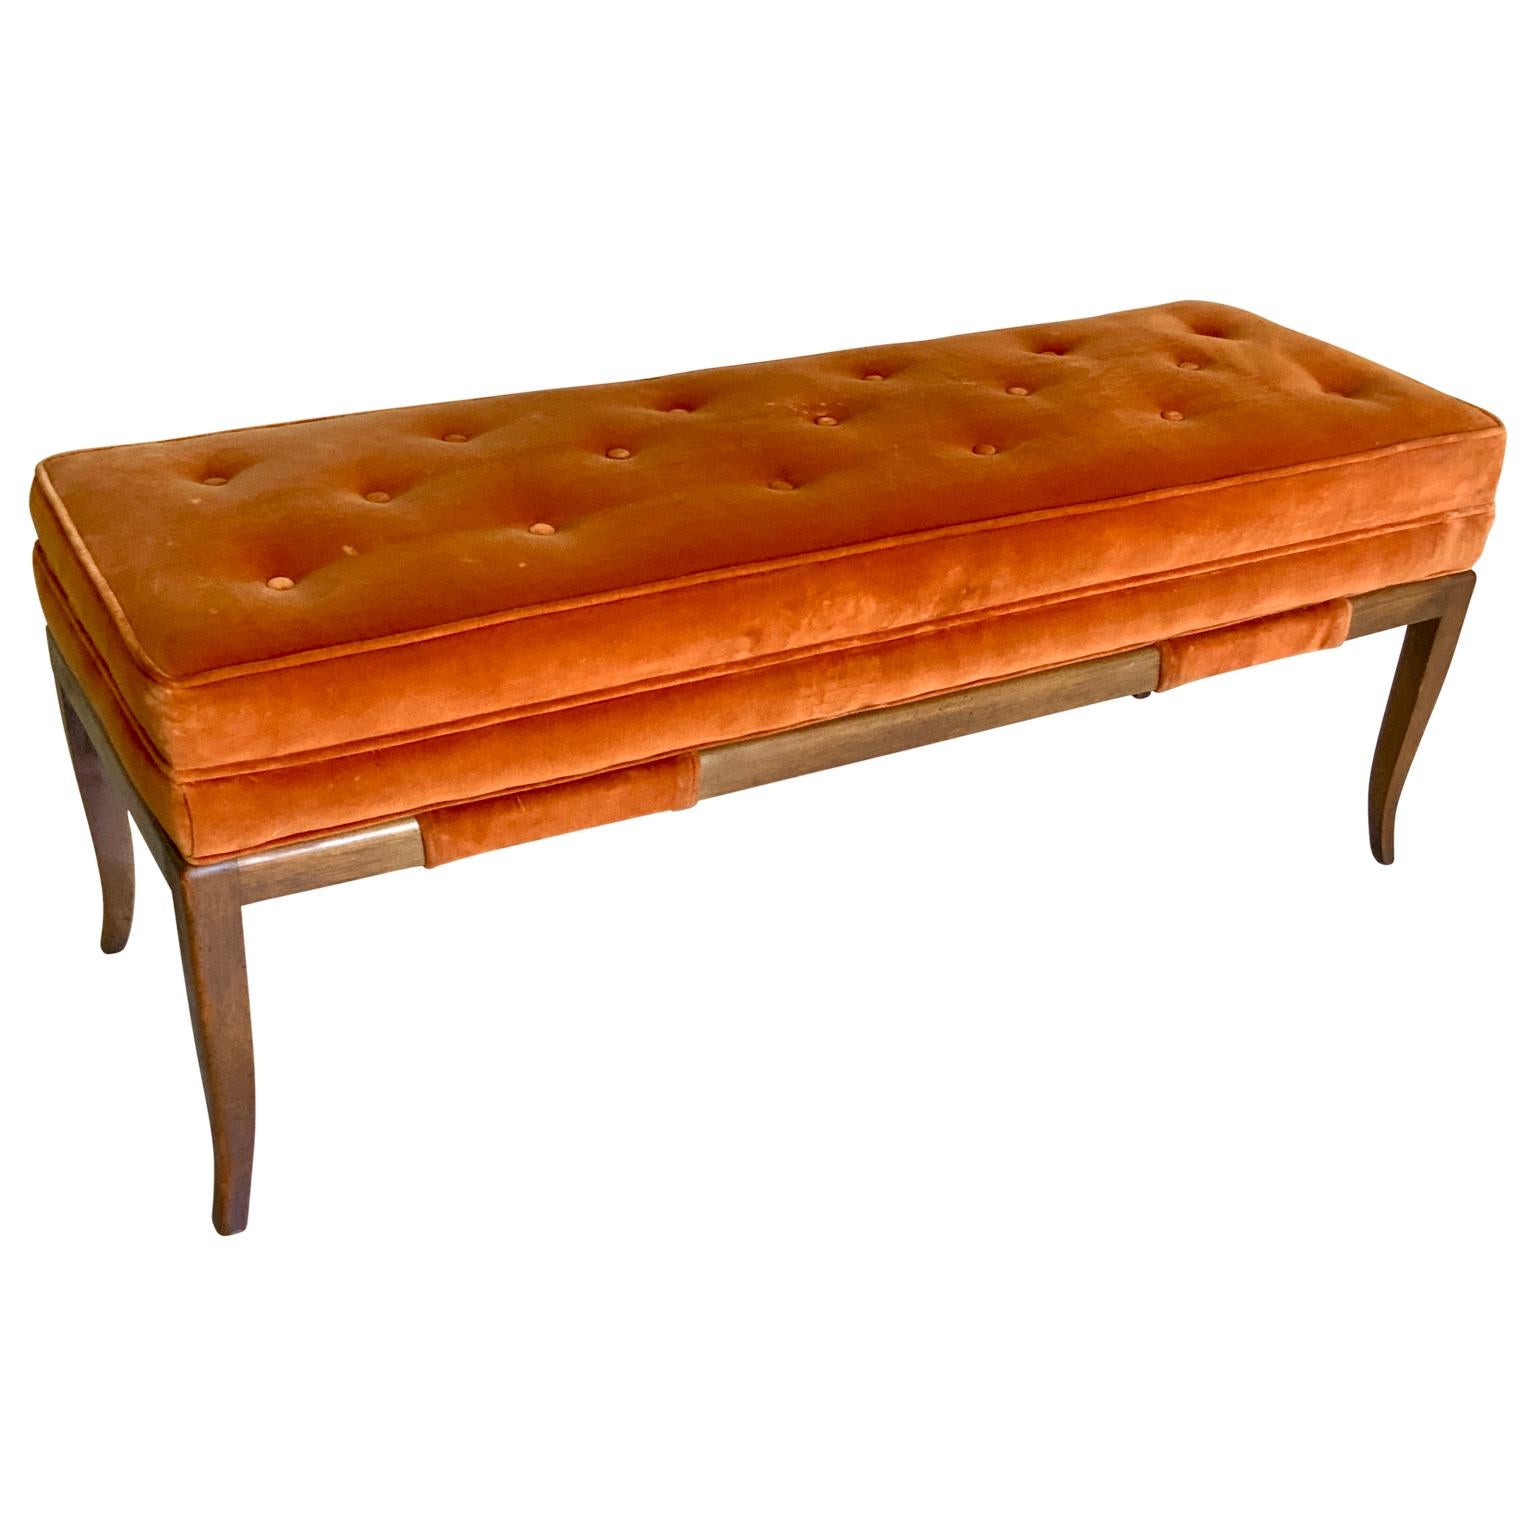 Offering a Tommi Parzinger for Parzinger originals collection tufted burnt orange velvet upholstered bench. This graceful fruitwood bench is untouched, original from the 1960's. Great in a bedroom, hallway, or entryway.